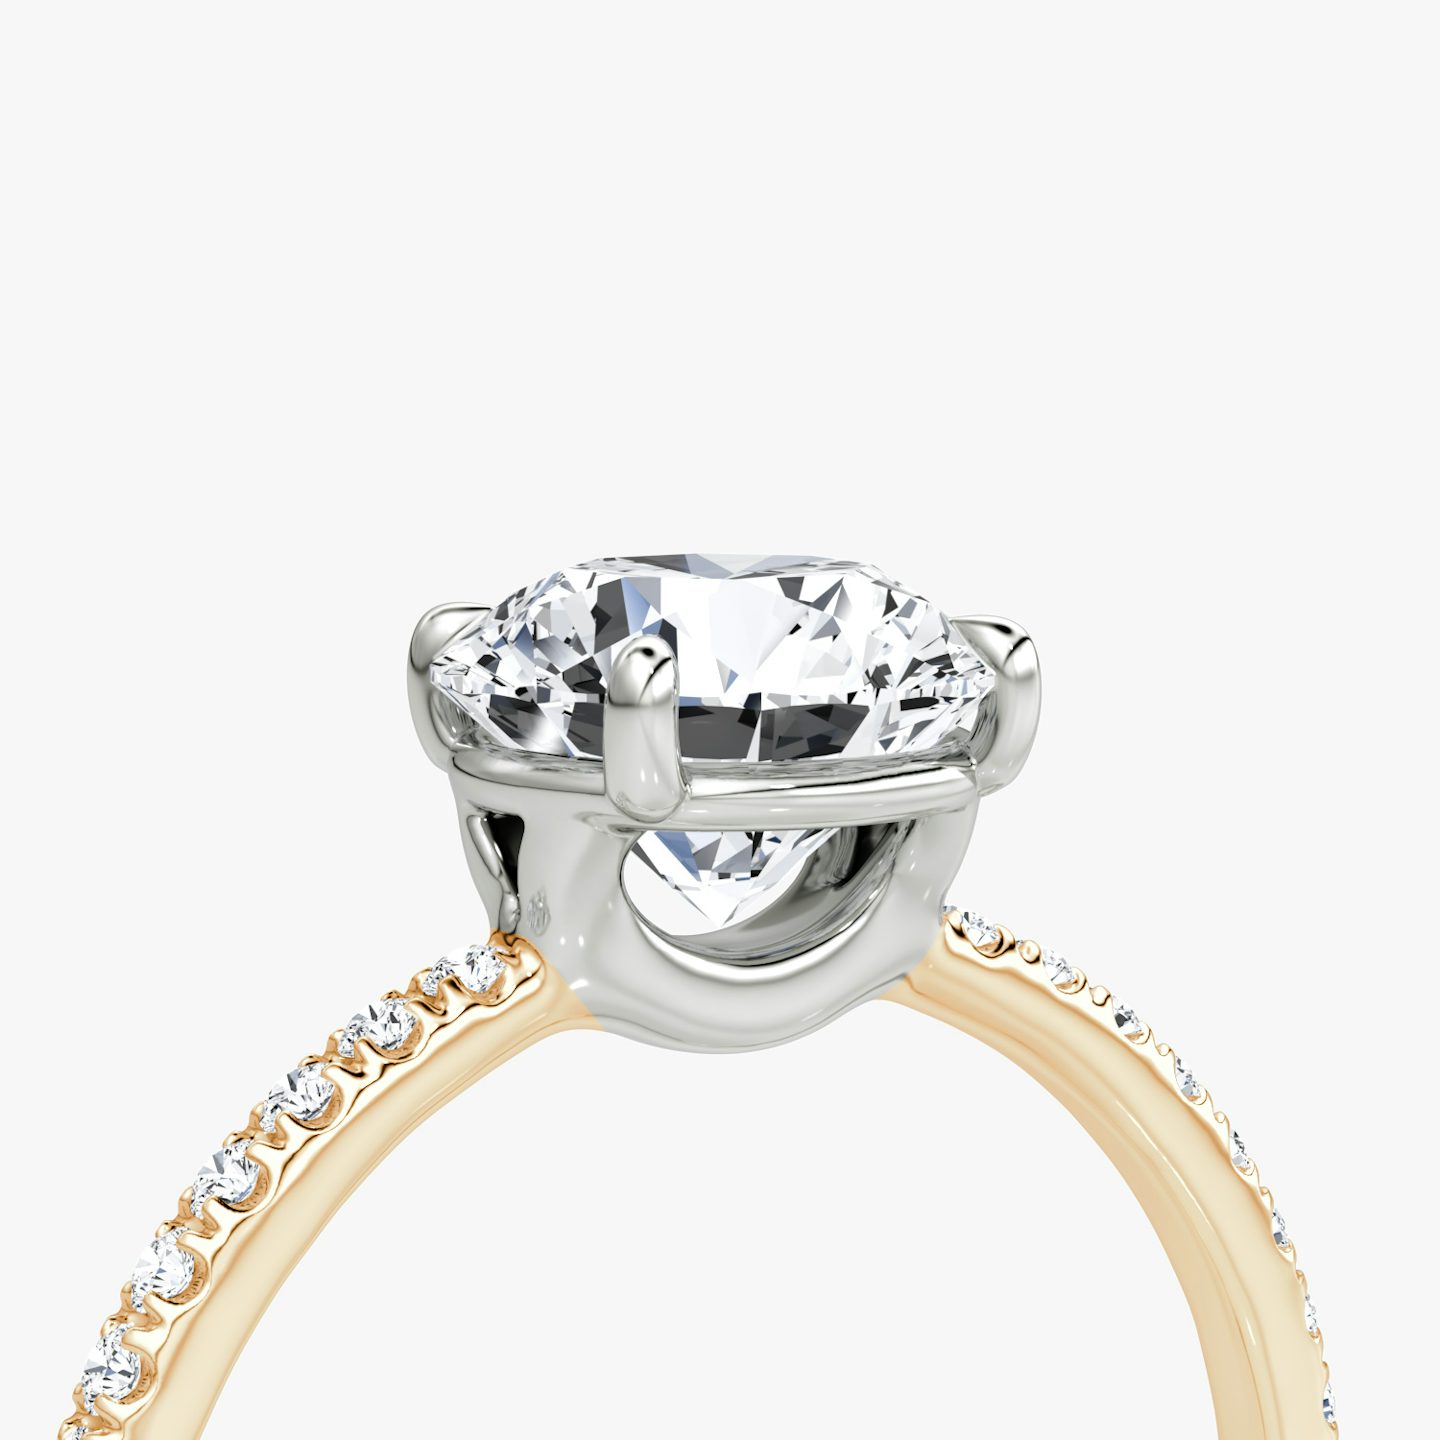 The Signature | Round Brilliant | 14k | 14k Rose Gold and Platinum | Band: Pavé | Band width: Standard | Carat weight: 1½ | Setting style: Plain | Diamond orientation: vertical